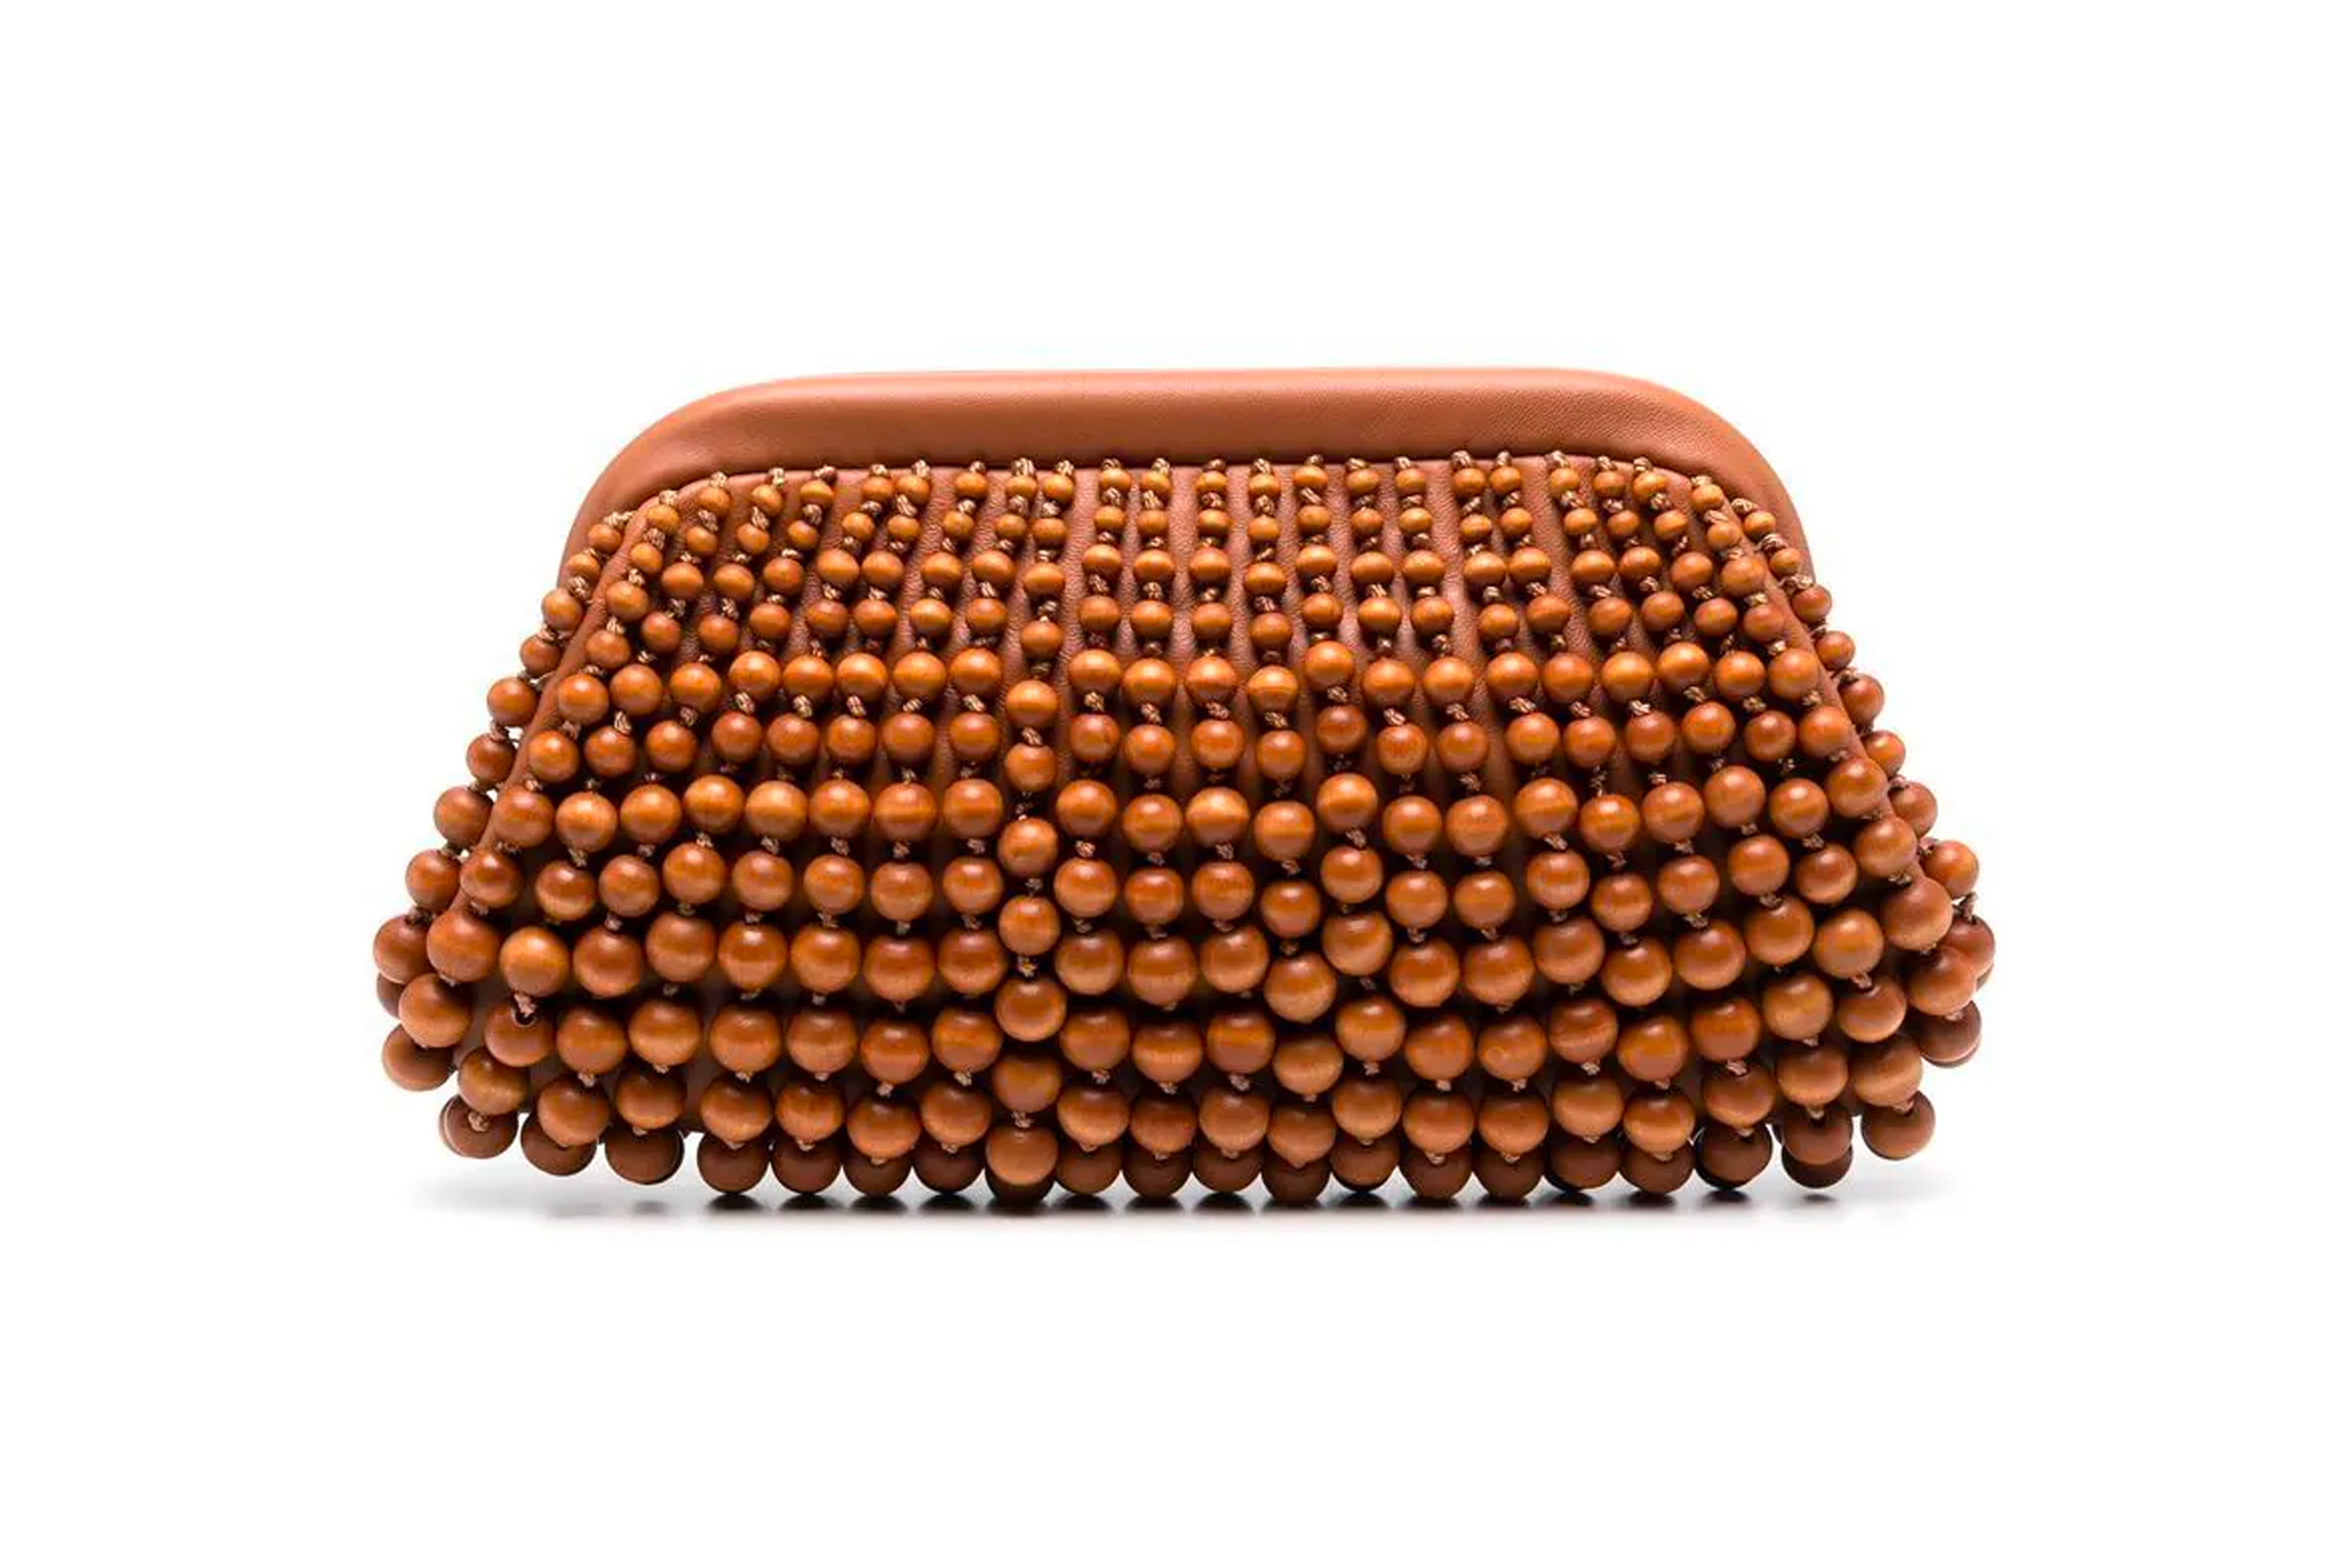 Best evening bags: Cult Gaia Bead-Embellished Clutch Bag